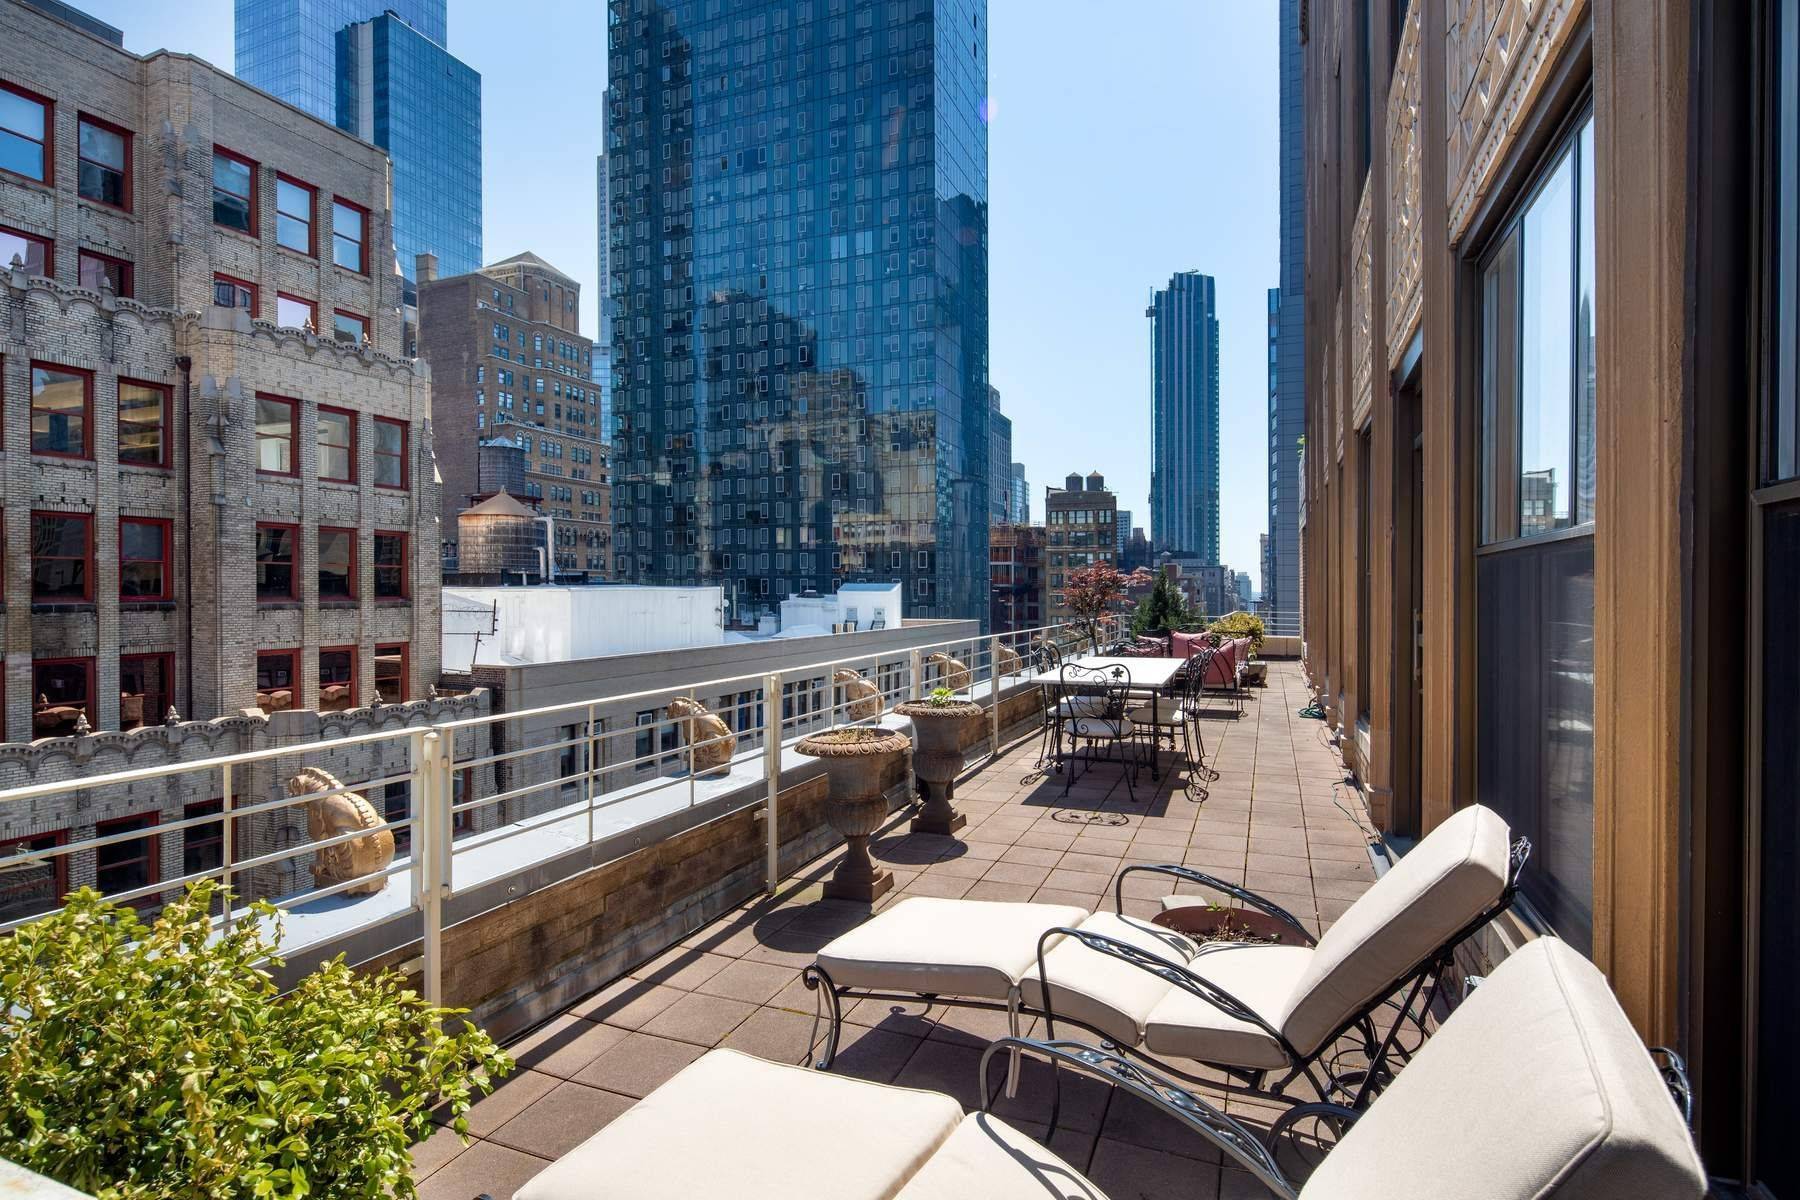 Summer in the city awaits you on your own private 600 square foot terrace !